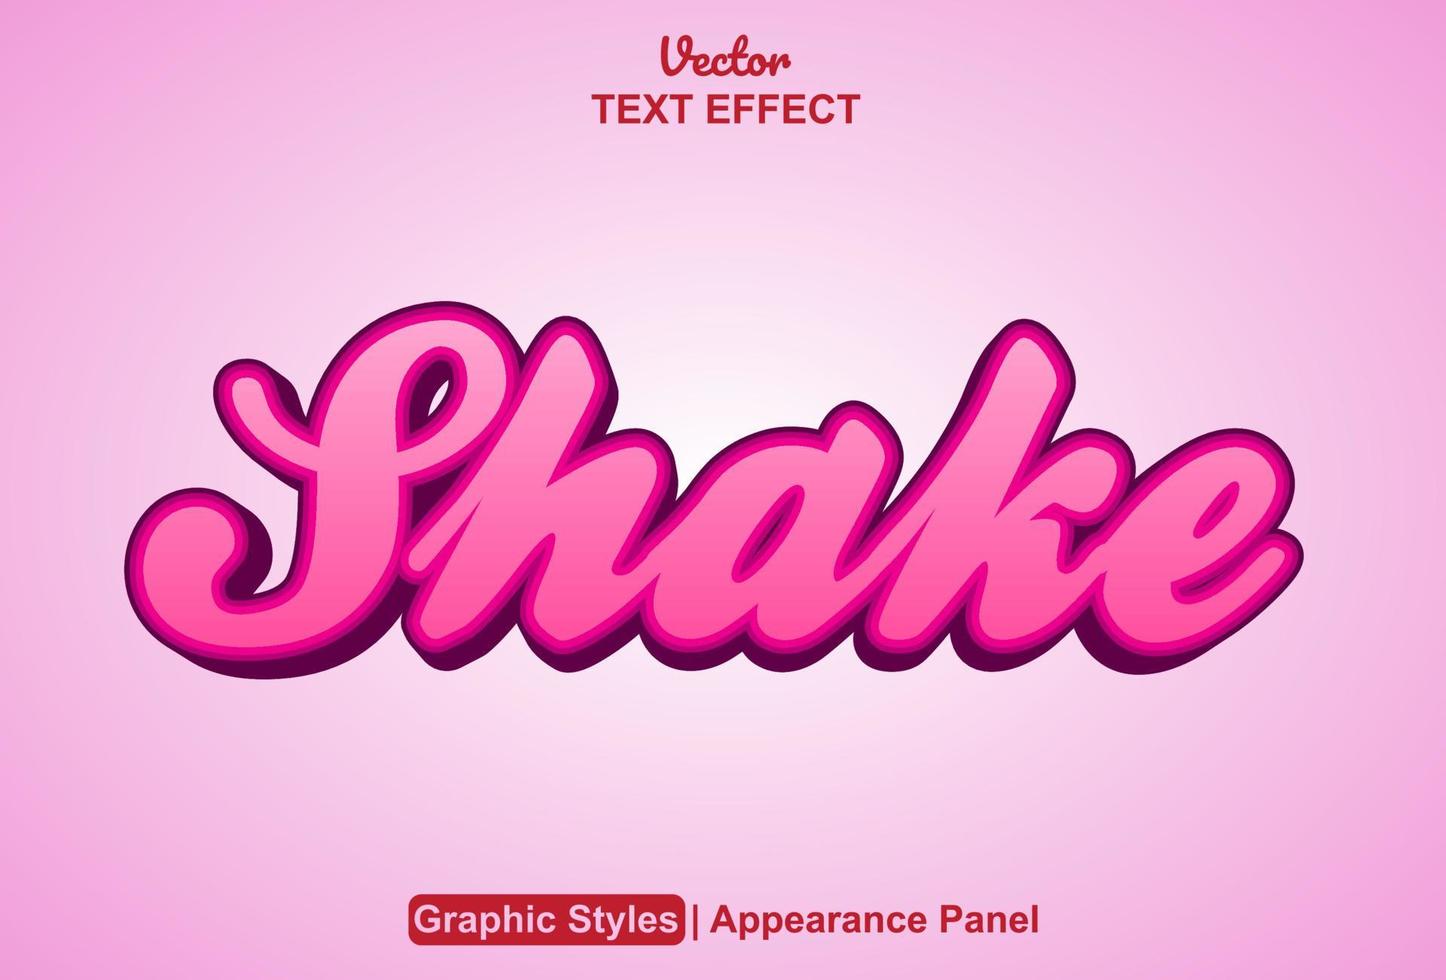 shake text effect with pink color graphic editable style vector